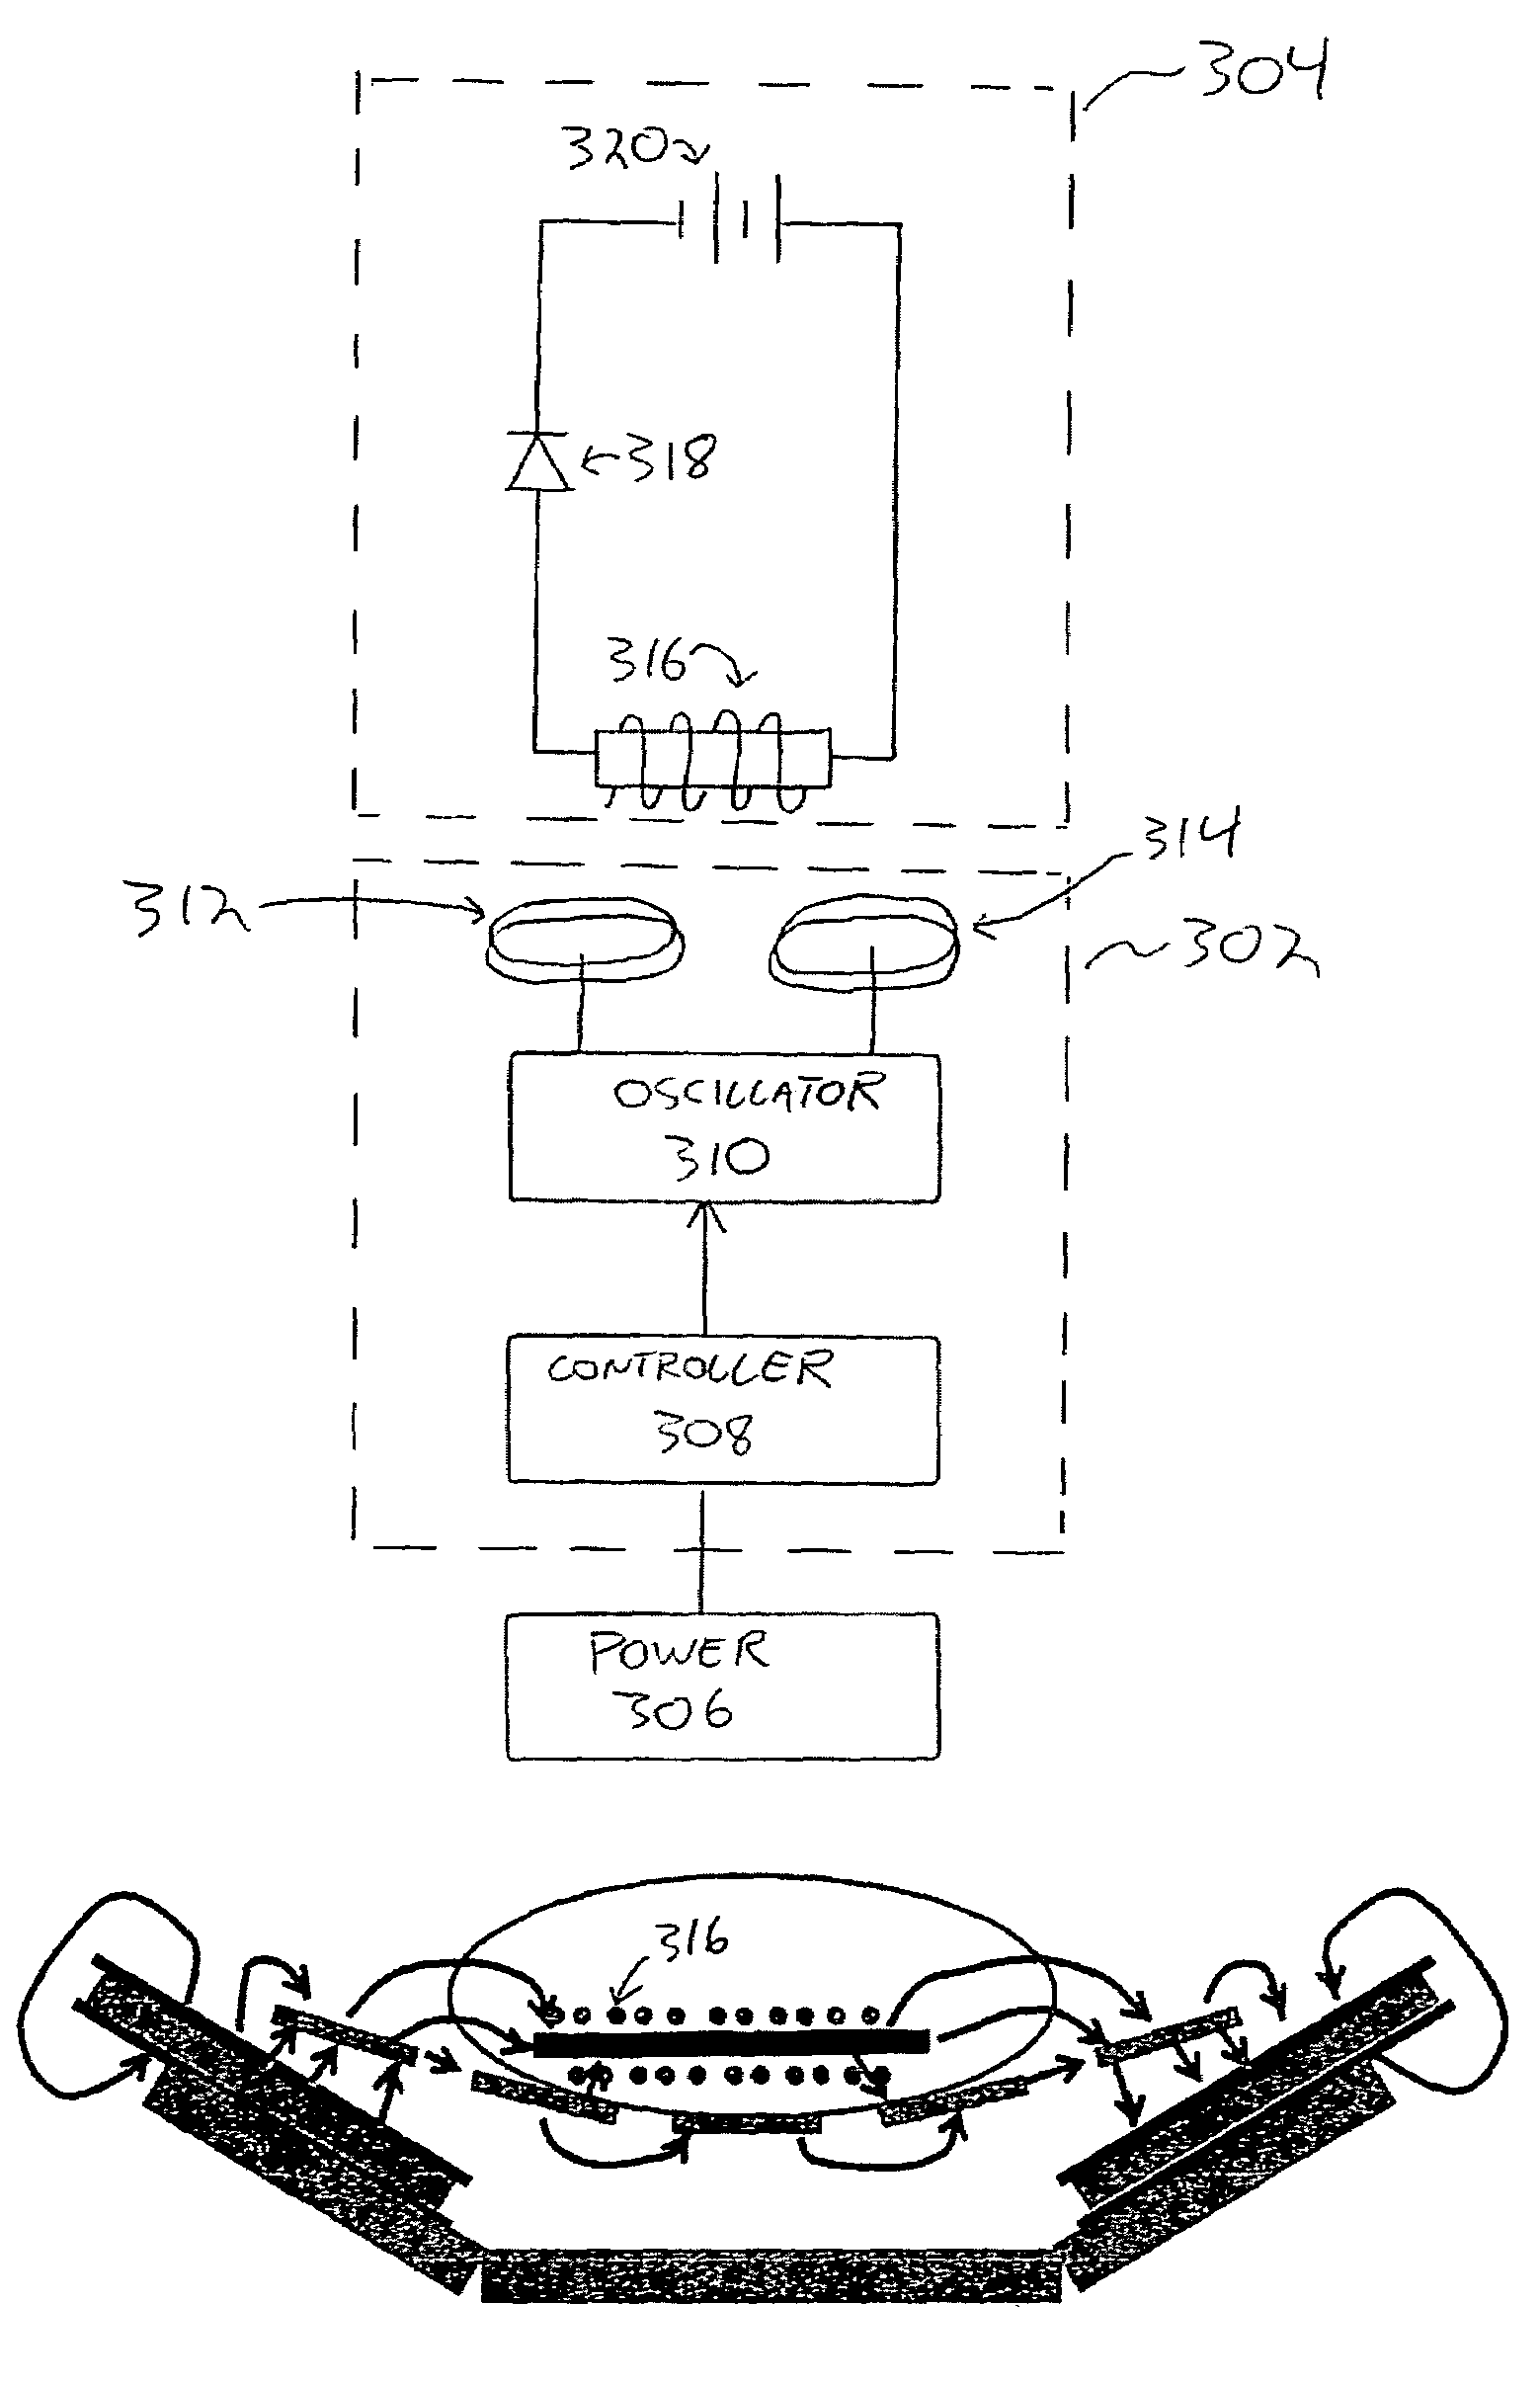 Inductive charging system